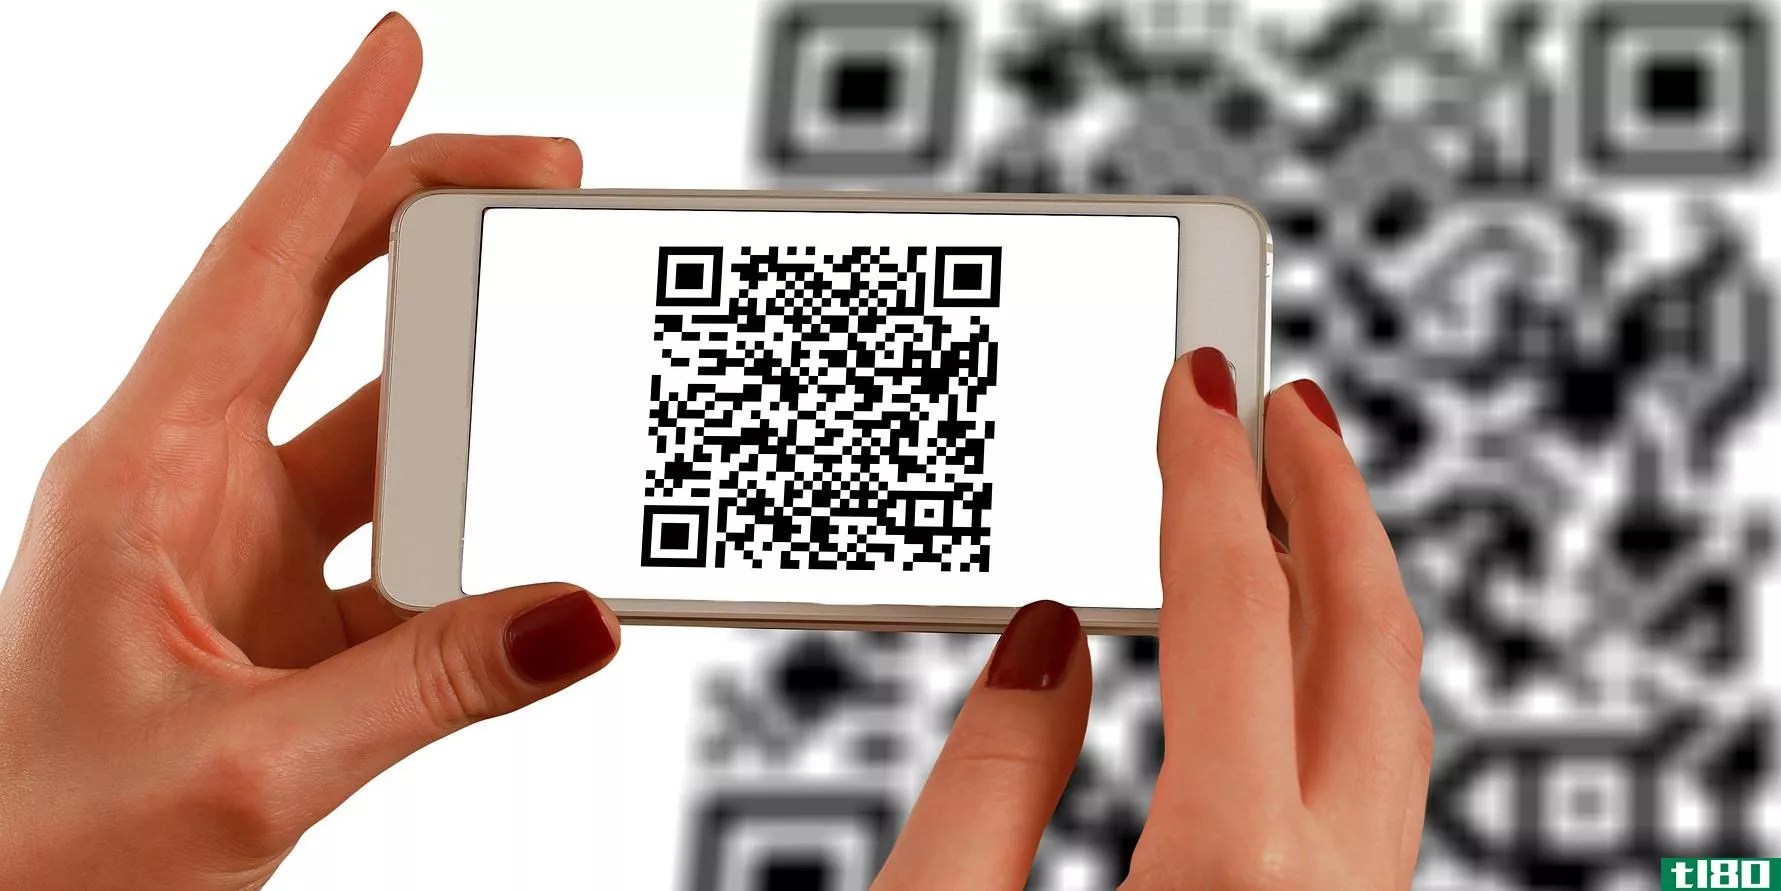 An explanation of what a QR code is